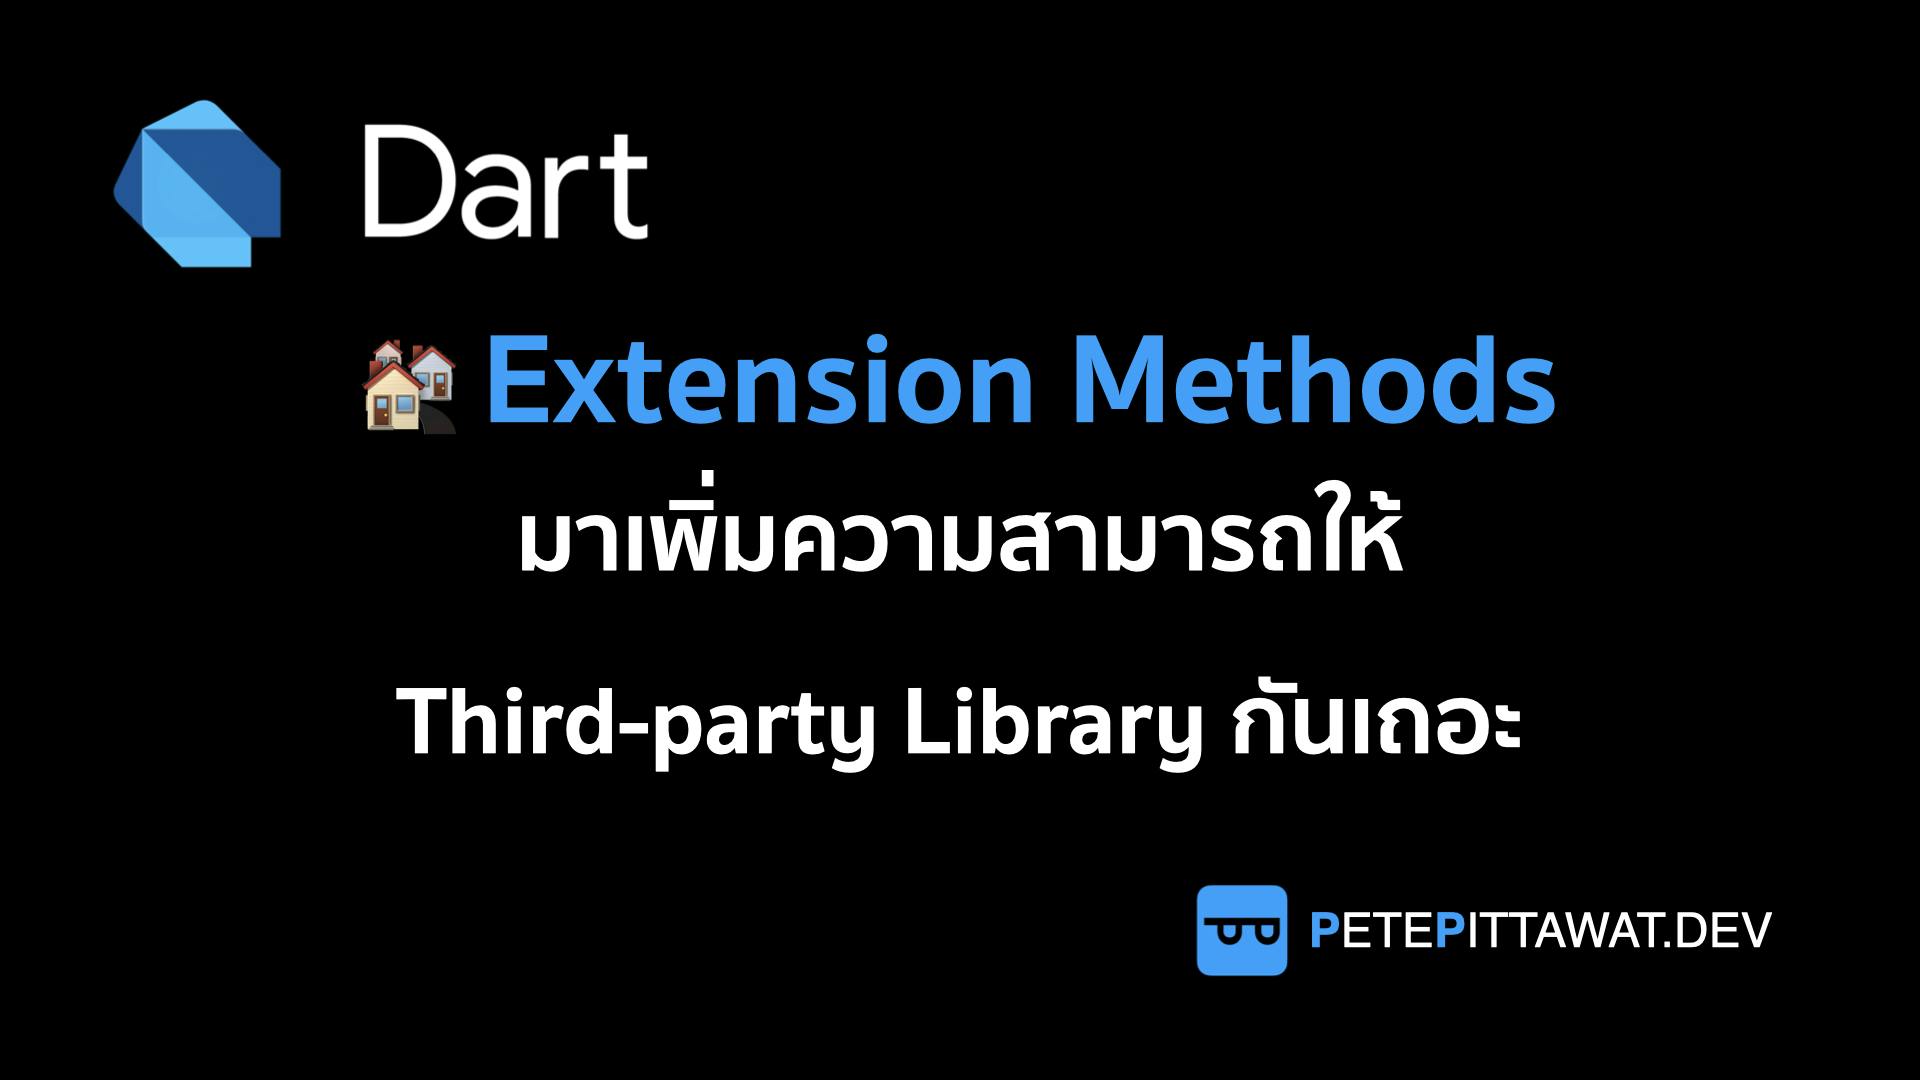 Cover Image for Dart: Extension Methods - มาเพิ่มความสามารถให้กับ Third-party Library กันเถอะ